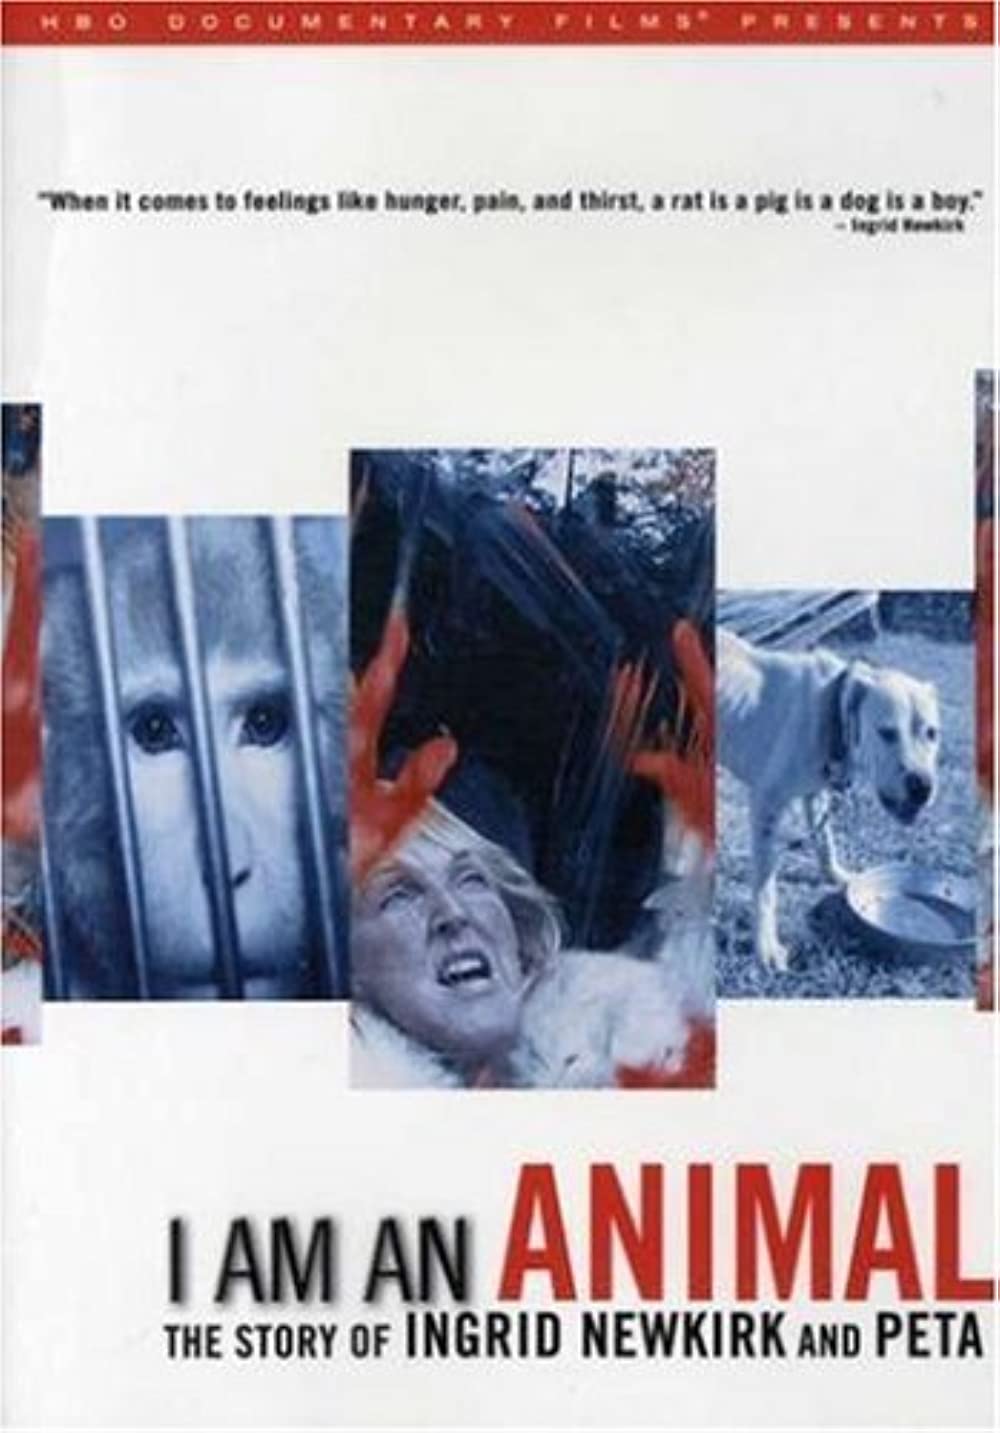 I Am an Animal: The Story of Ingrid Newkirk and PETA (2007)